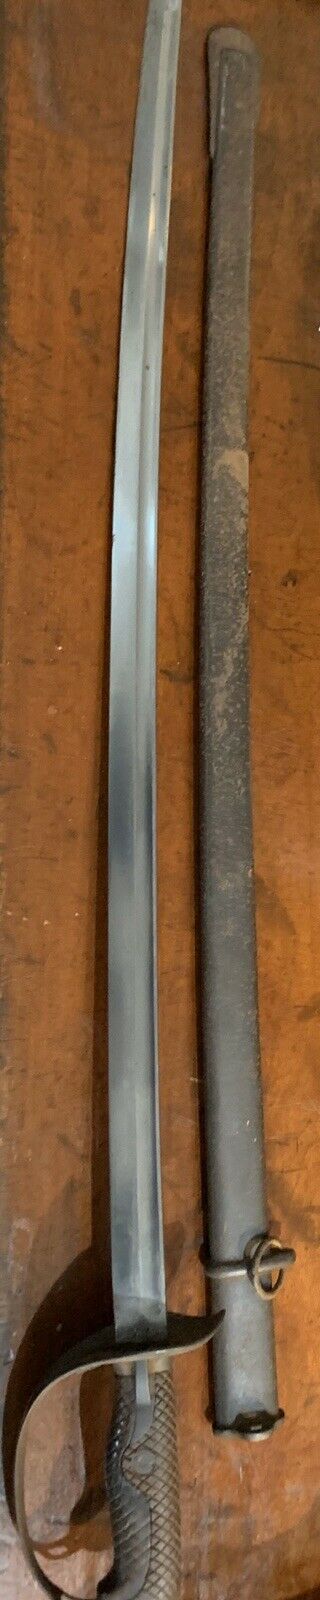 Antique Officers Sword With Locking Scabbard